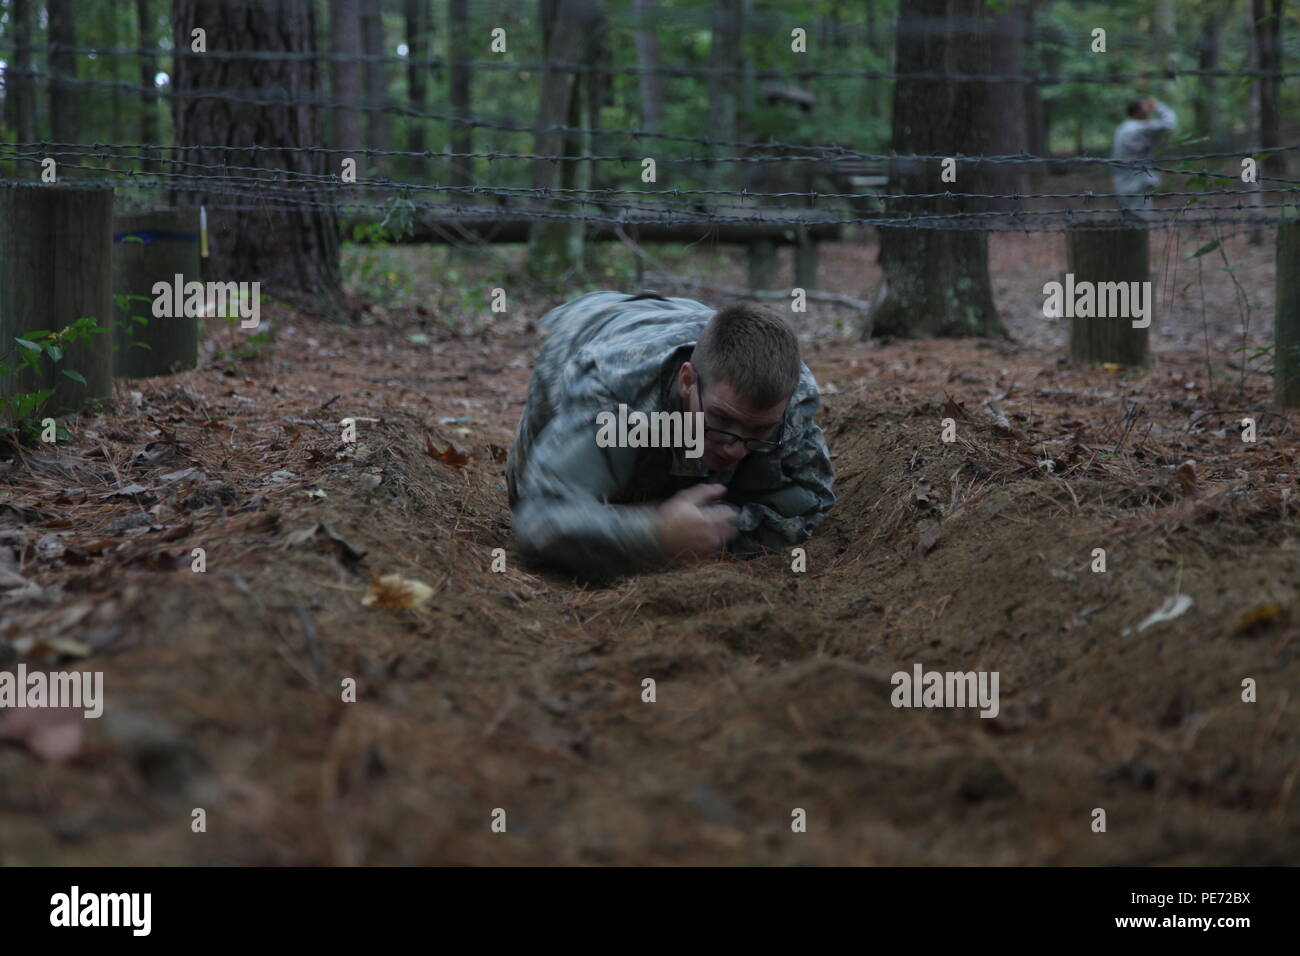 U.S. Army Pfc. Ian Ryan, assigned to 55th Signal Company (Combat Camera), high crawls under barbed wire while going through an obstacle course during a Field Training Exercise (FTX) at Fort AP Hill, Va., Sept. 28, 2015. The 55th Signal Company conducts a FTX twice a year in order to maintain tactical proficiency, as well as to develop and prepare Soldiers for the rigor of combat. (U.S. Army photo by Pfc. Elliott Page/Released). Stock Photo